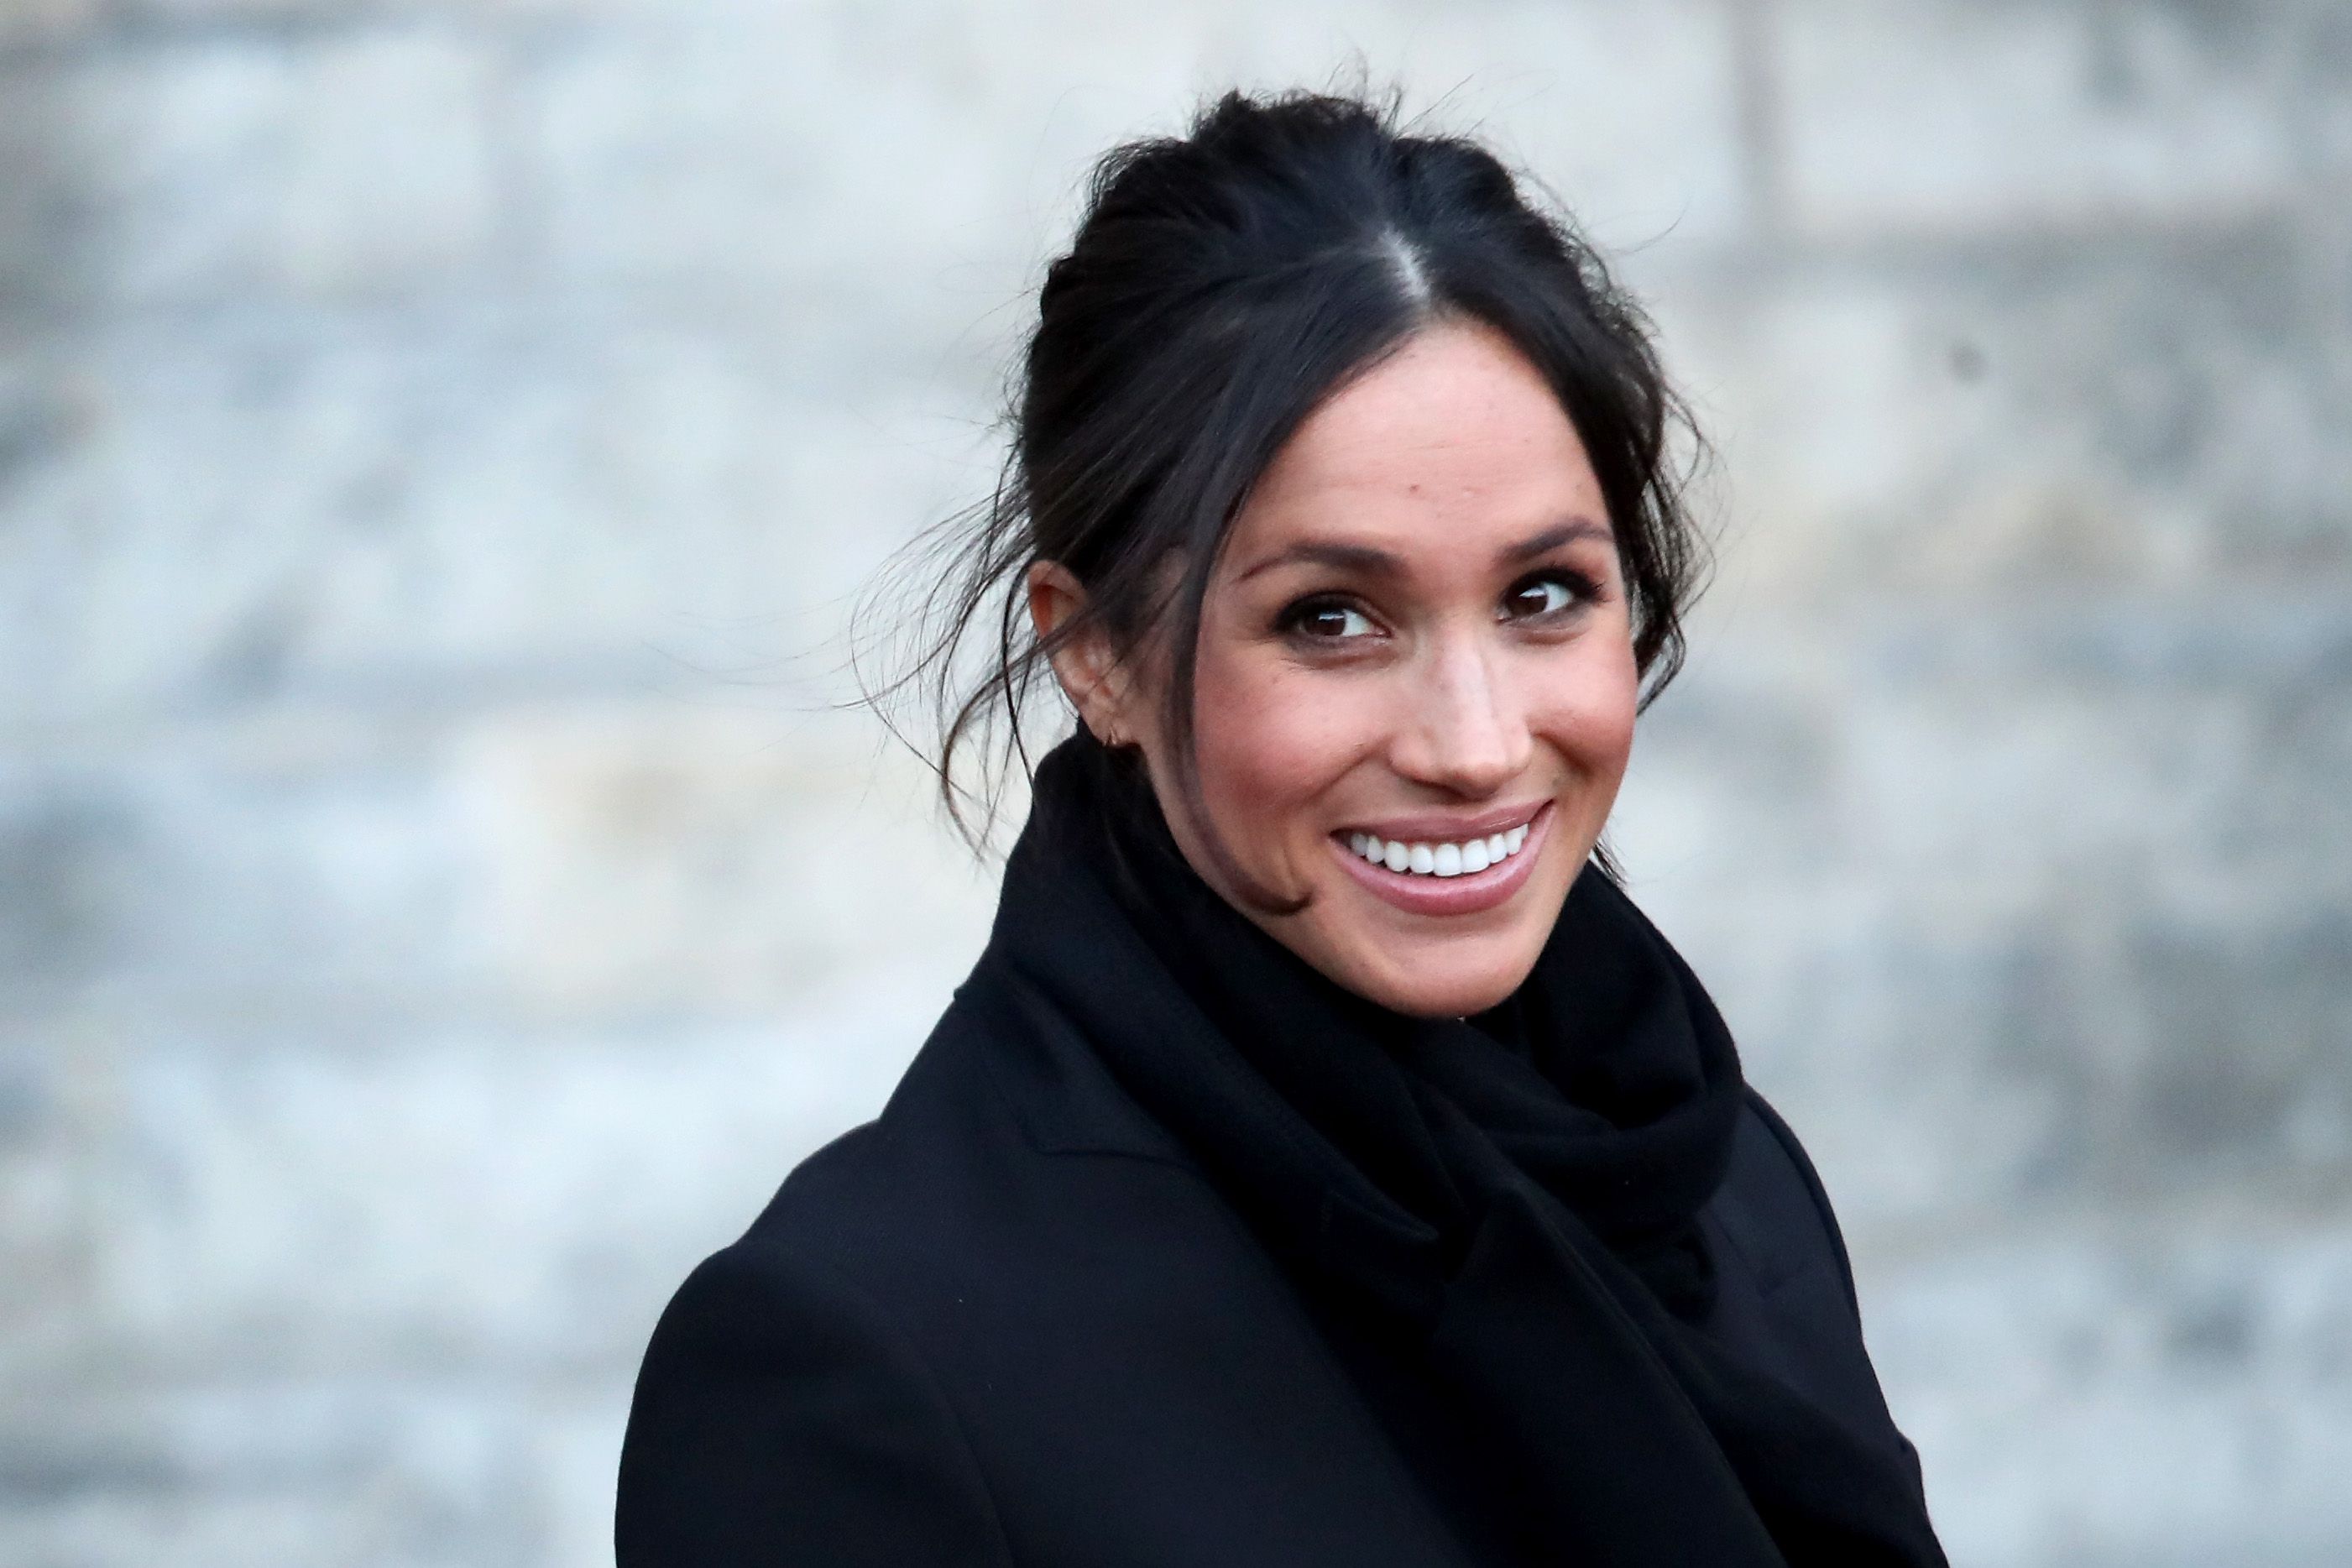 Meghan Markle spotted in New York for rumored baby shower